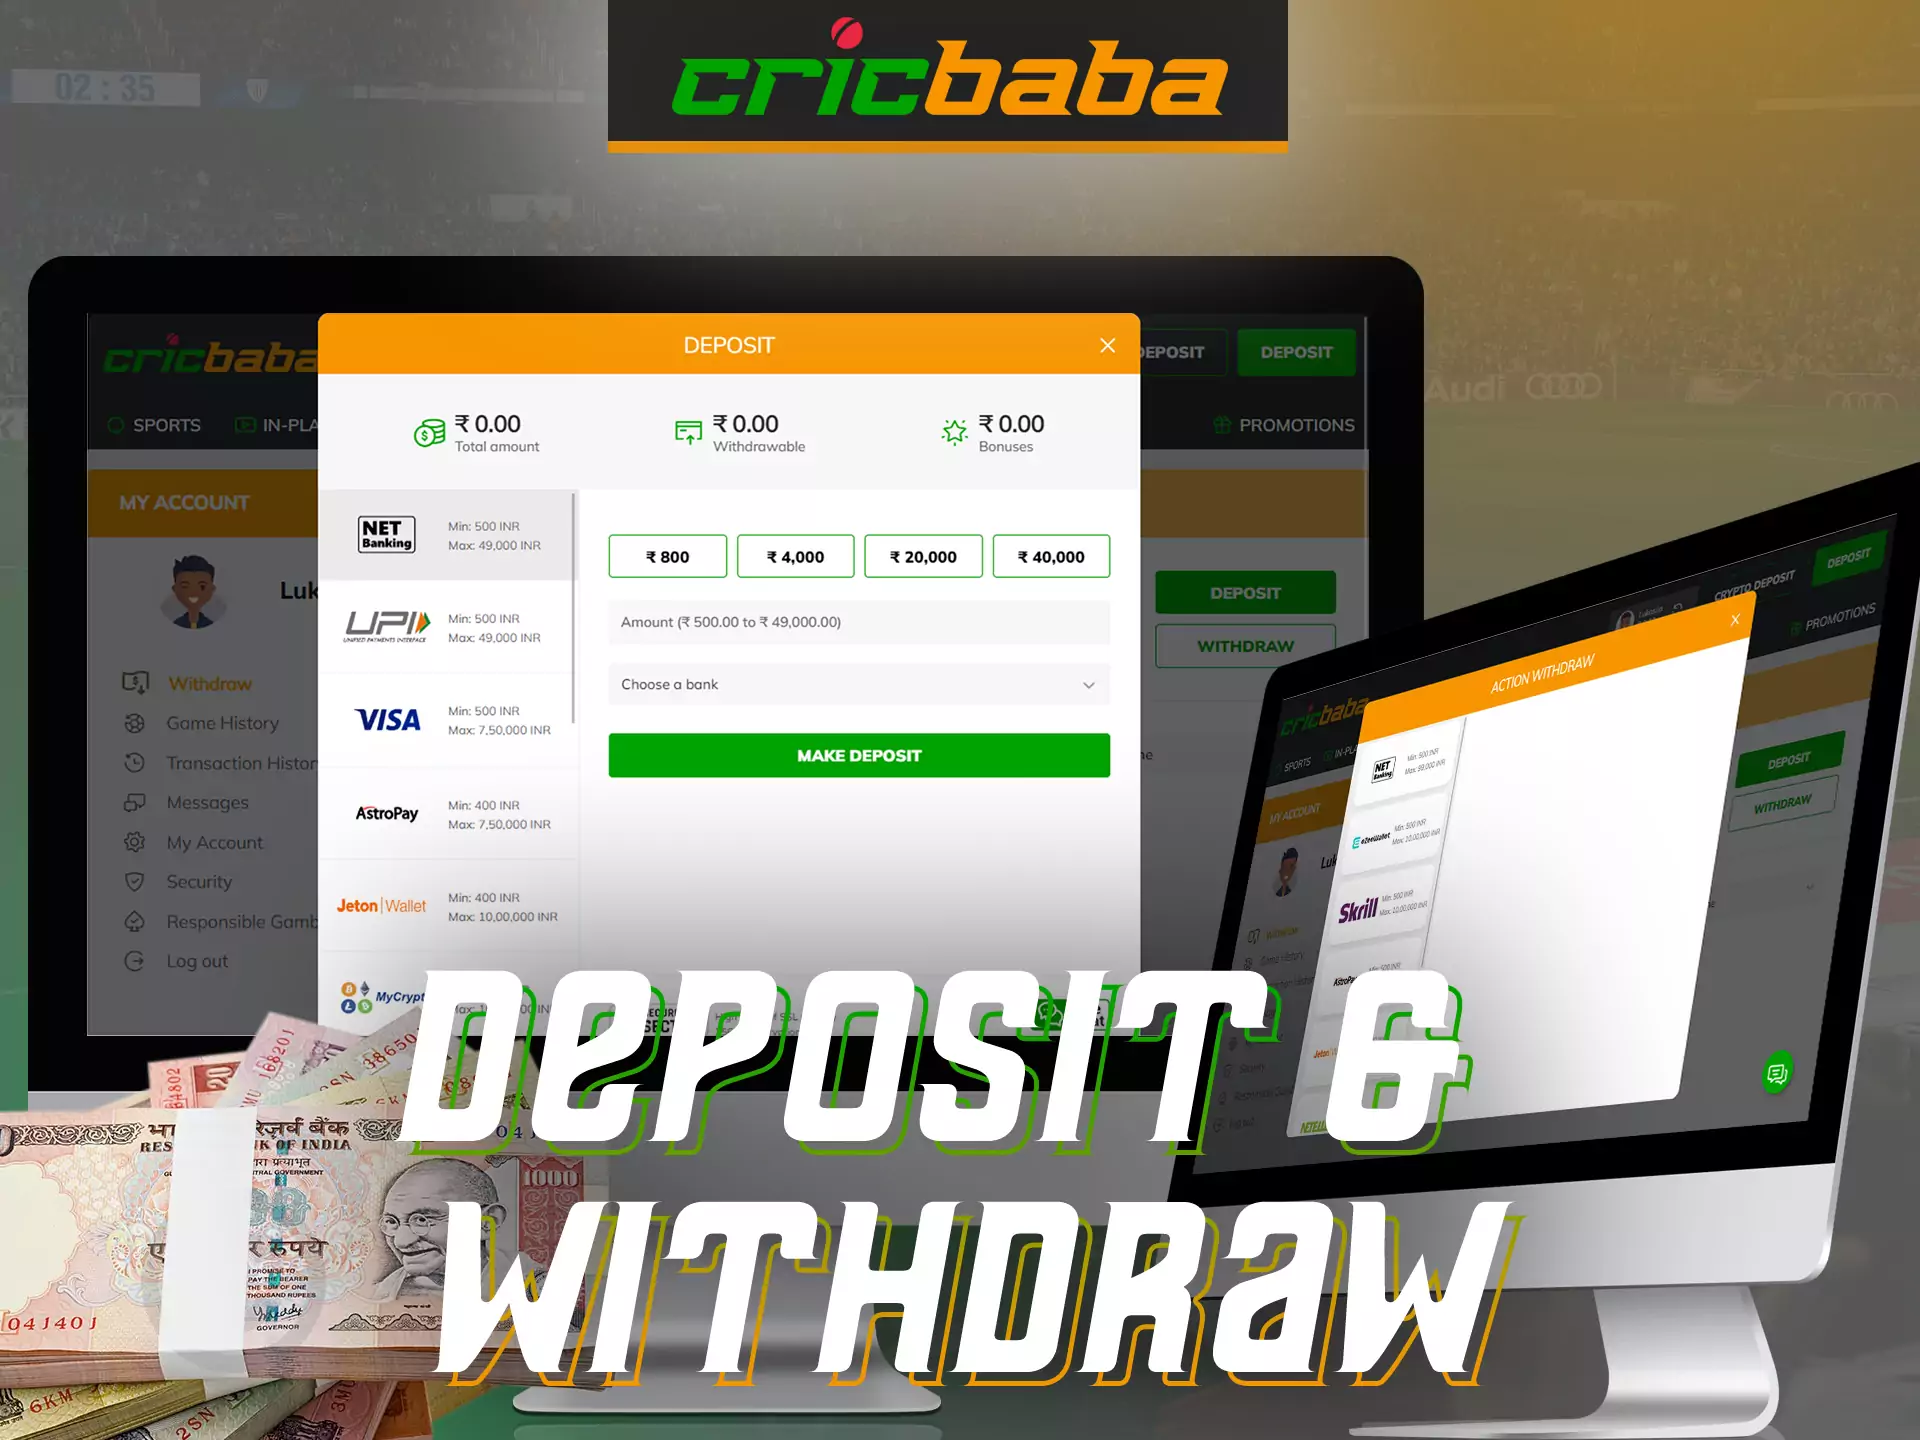 Try to deposit your Cricbaba account or withdraw money, it's easy and fast.